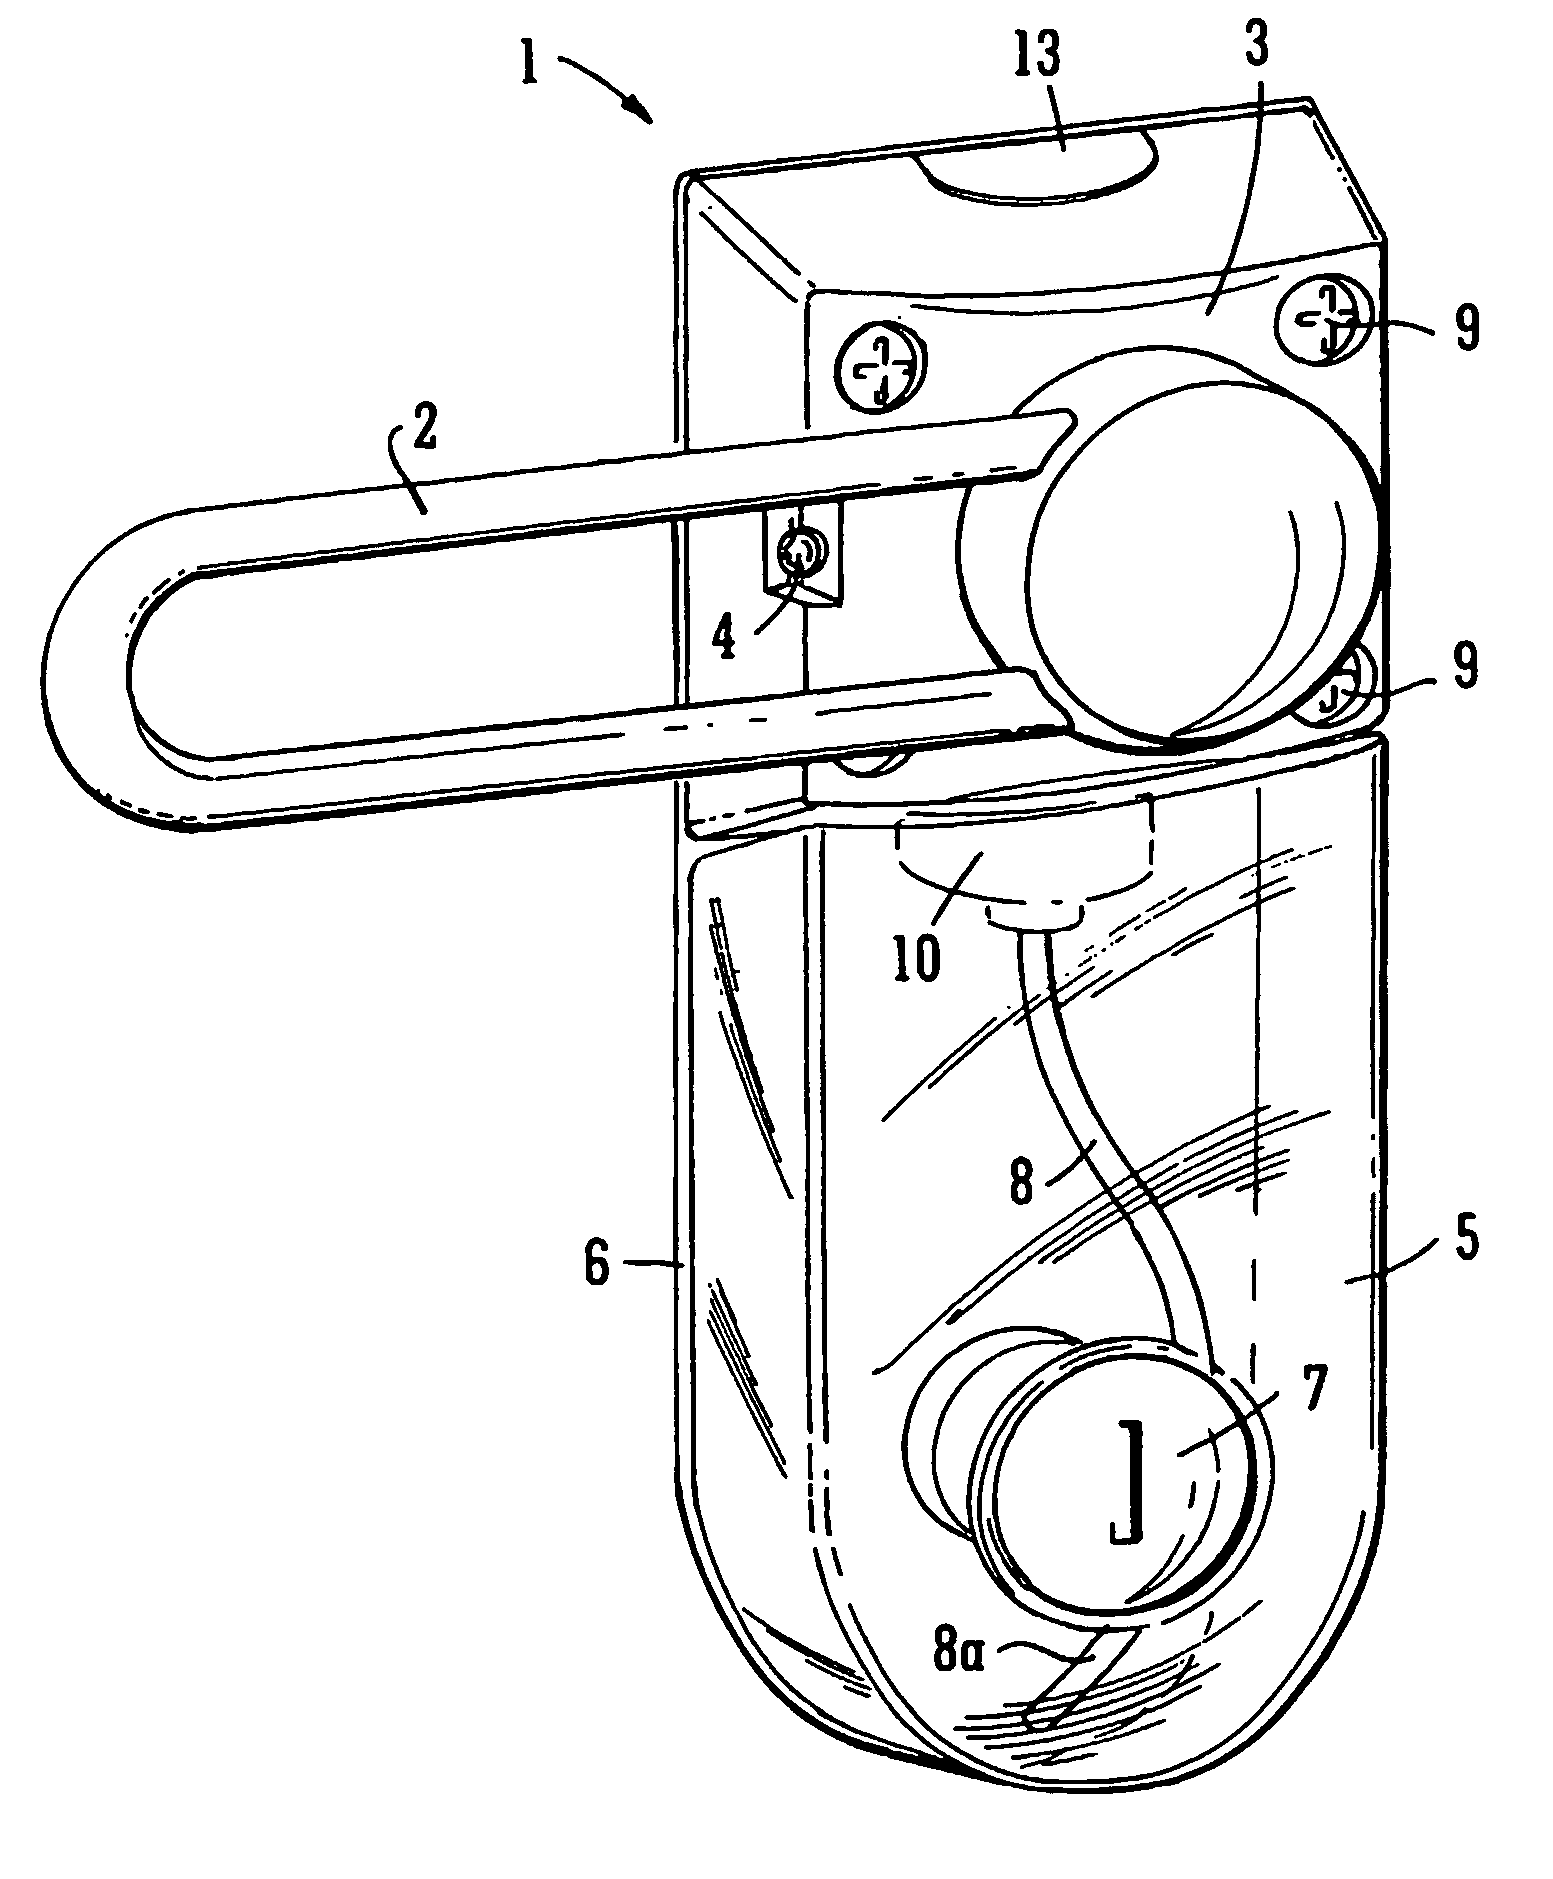 Method and apparatus for disinfecting items